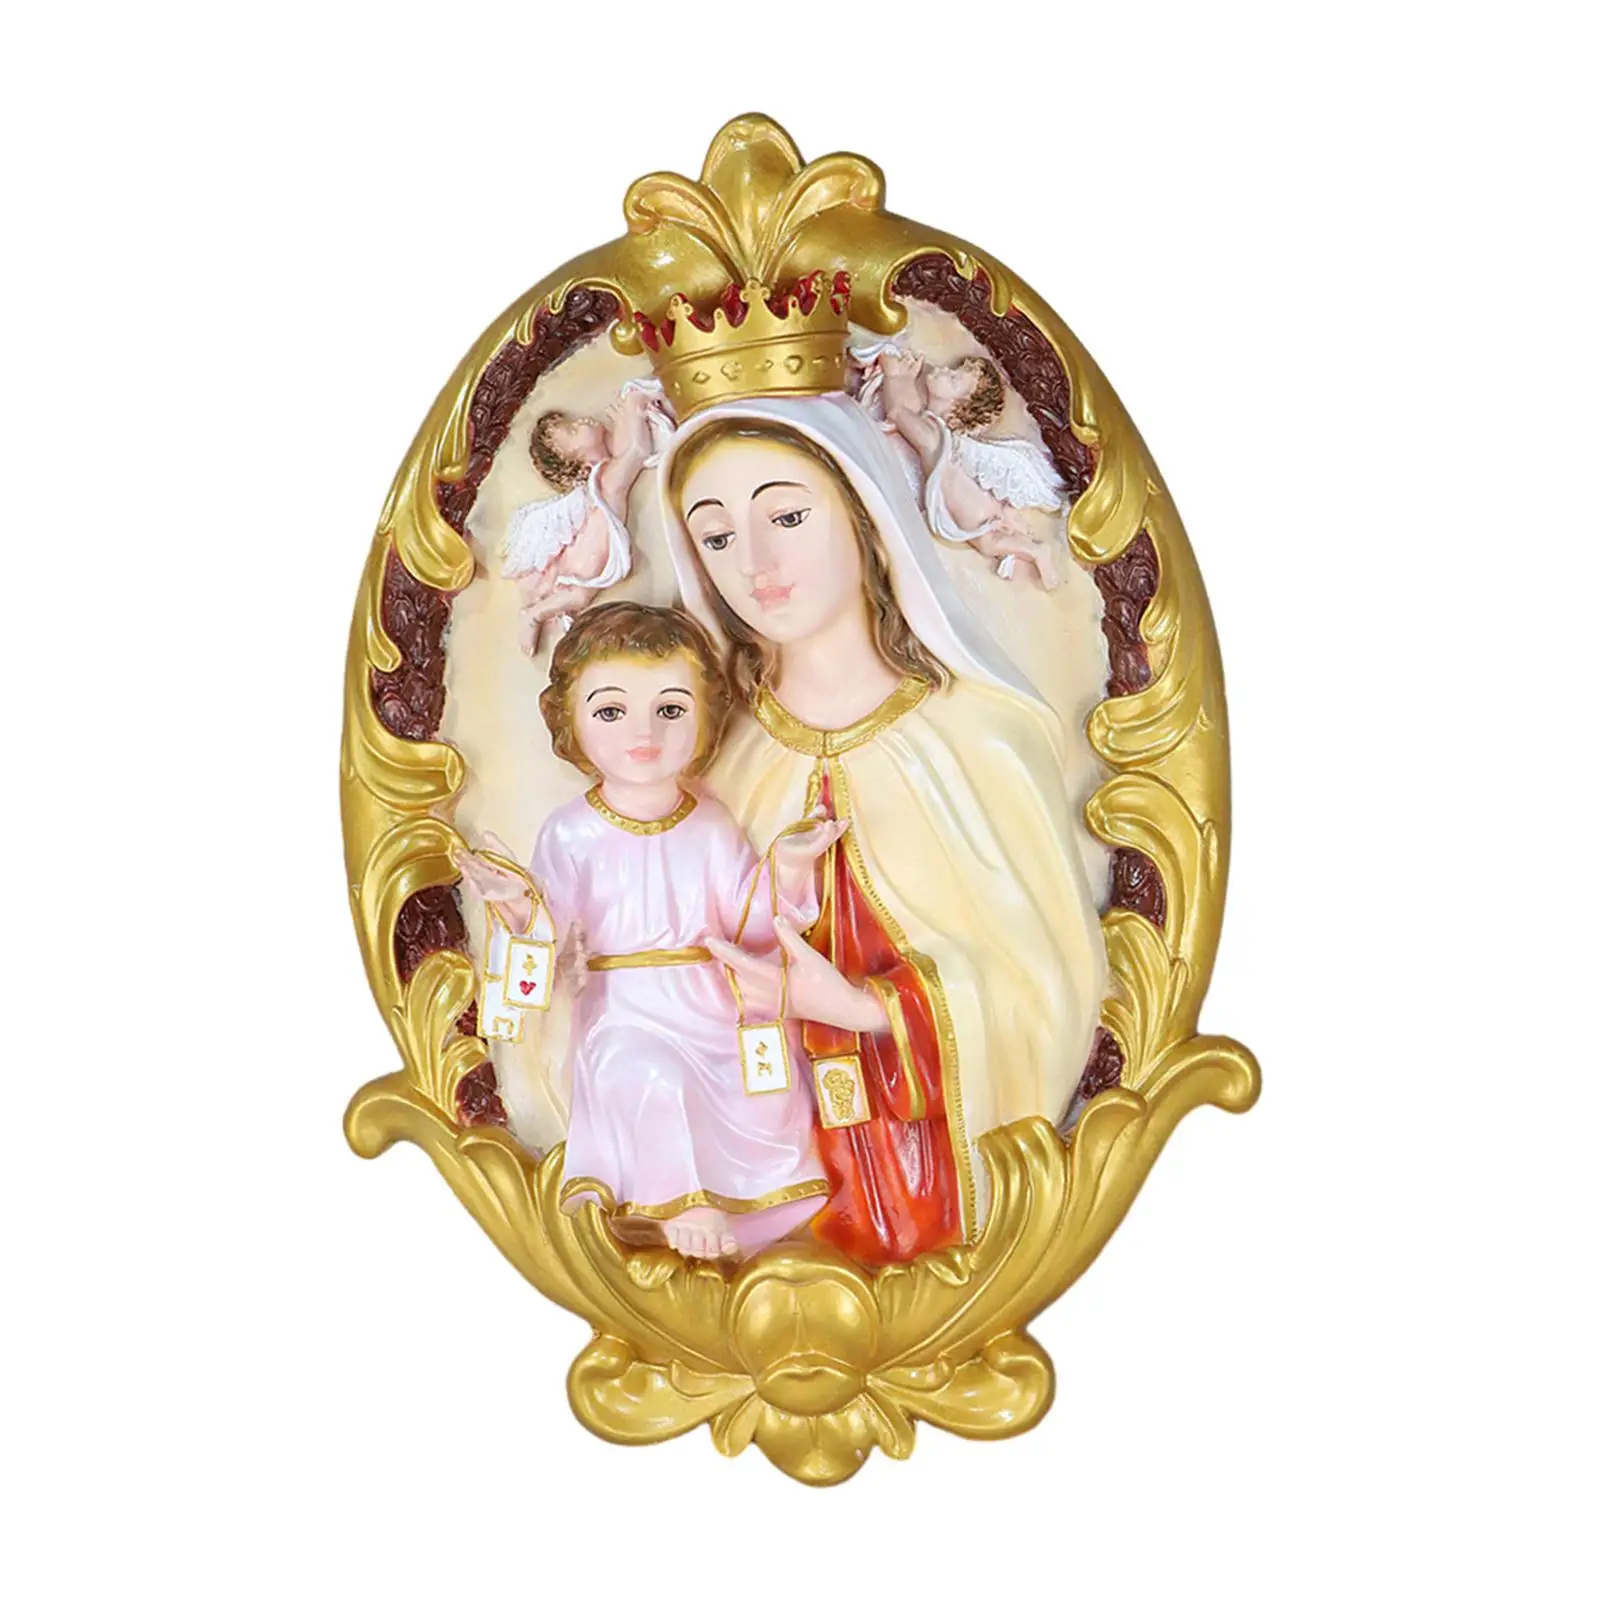 Catholic Jesus Mother Mary Sculpture Resin Decorative Crafts Xmas Present Religious Figure Statue for Wall Dining Shelf Table